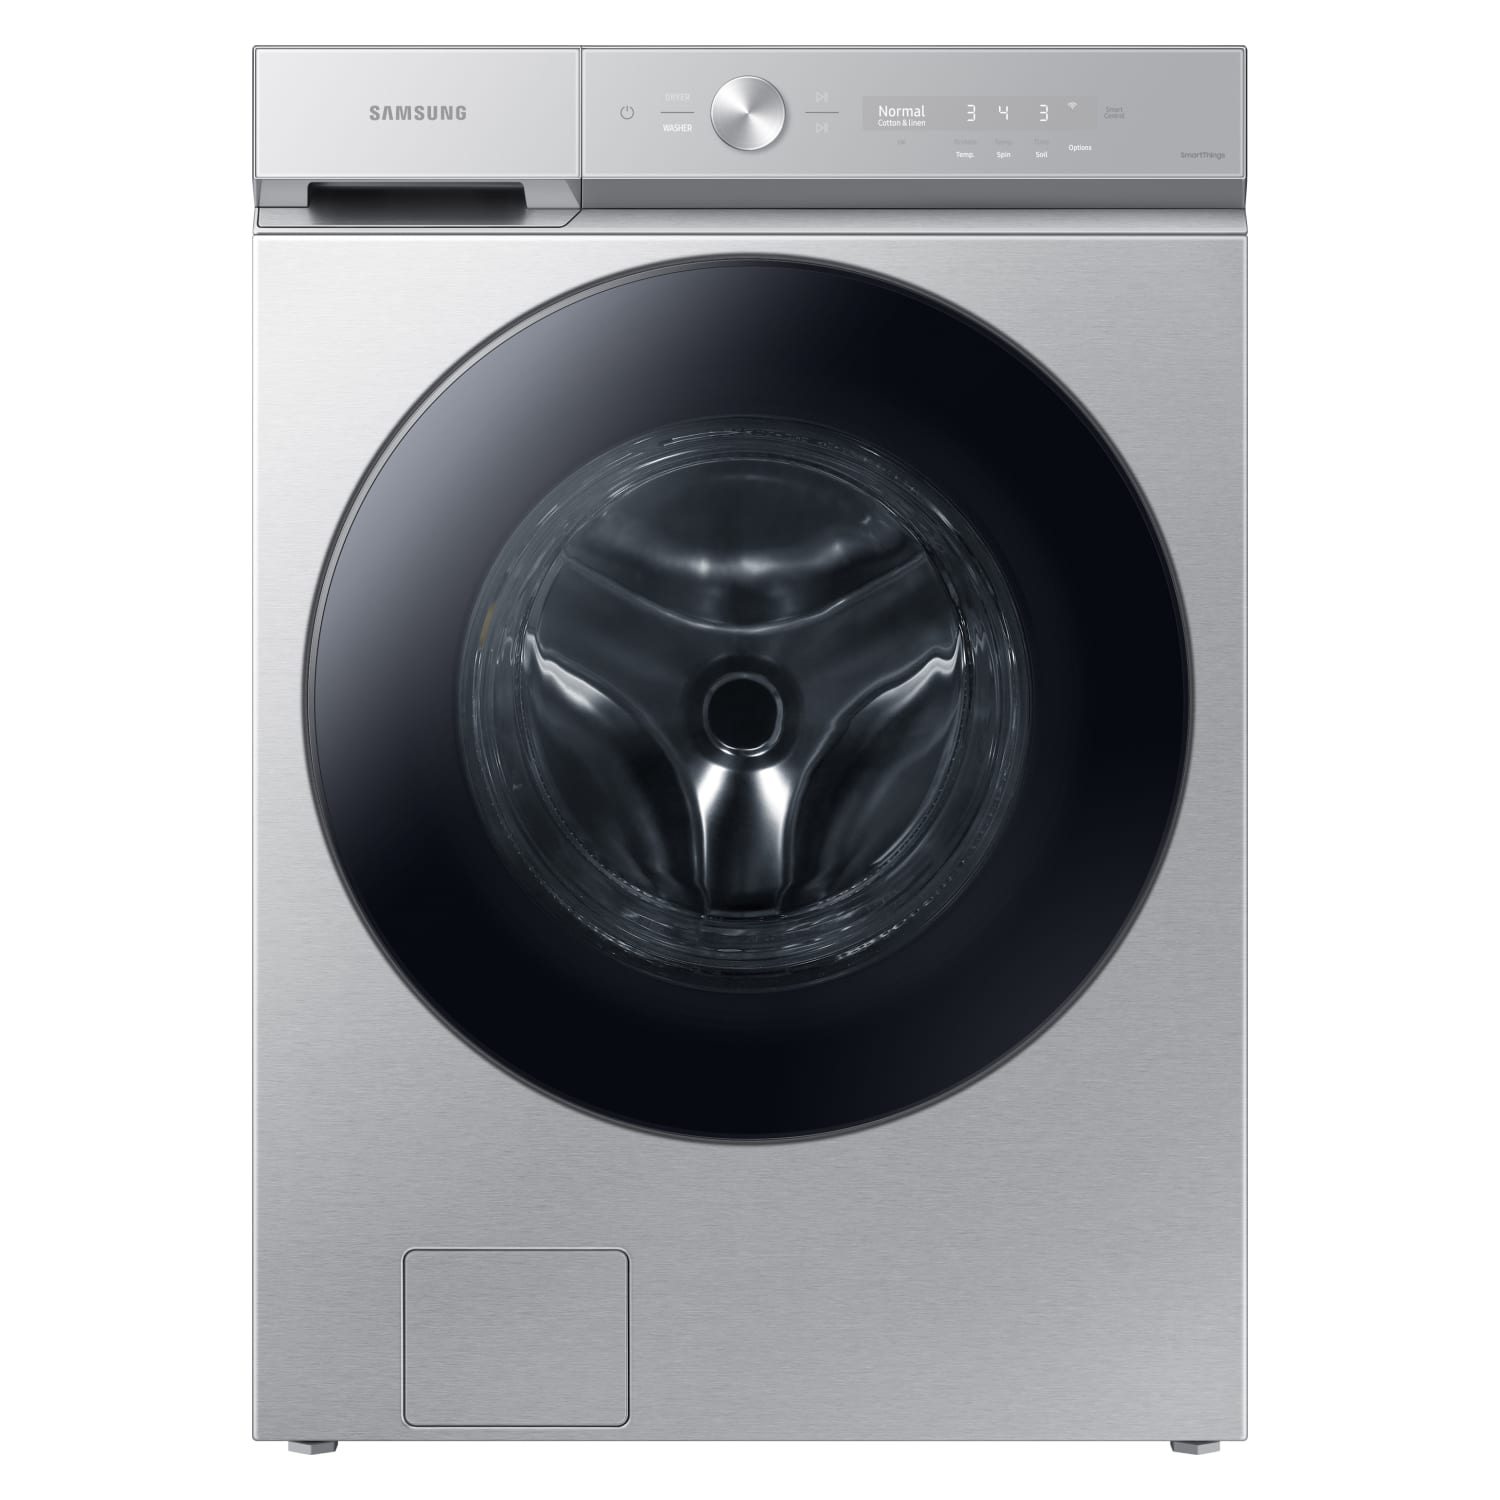 Samsung BESPOKE 5.3 cu. ft. Ultra Capacity Front Load Washer with Super Speed Wash and AI Smart Dial in Silver Steel